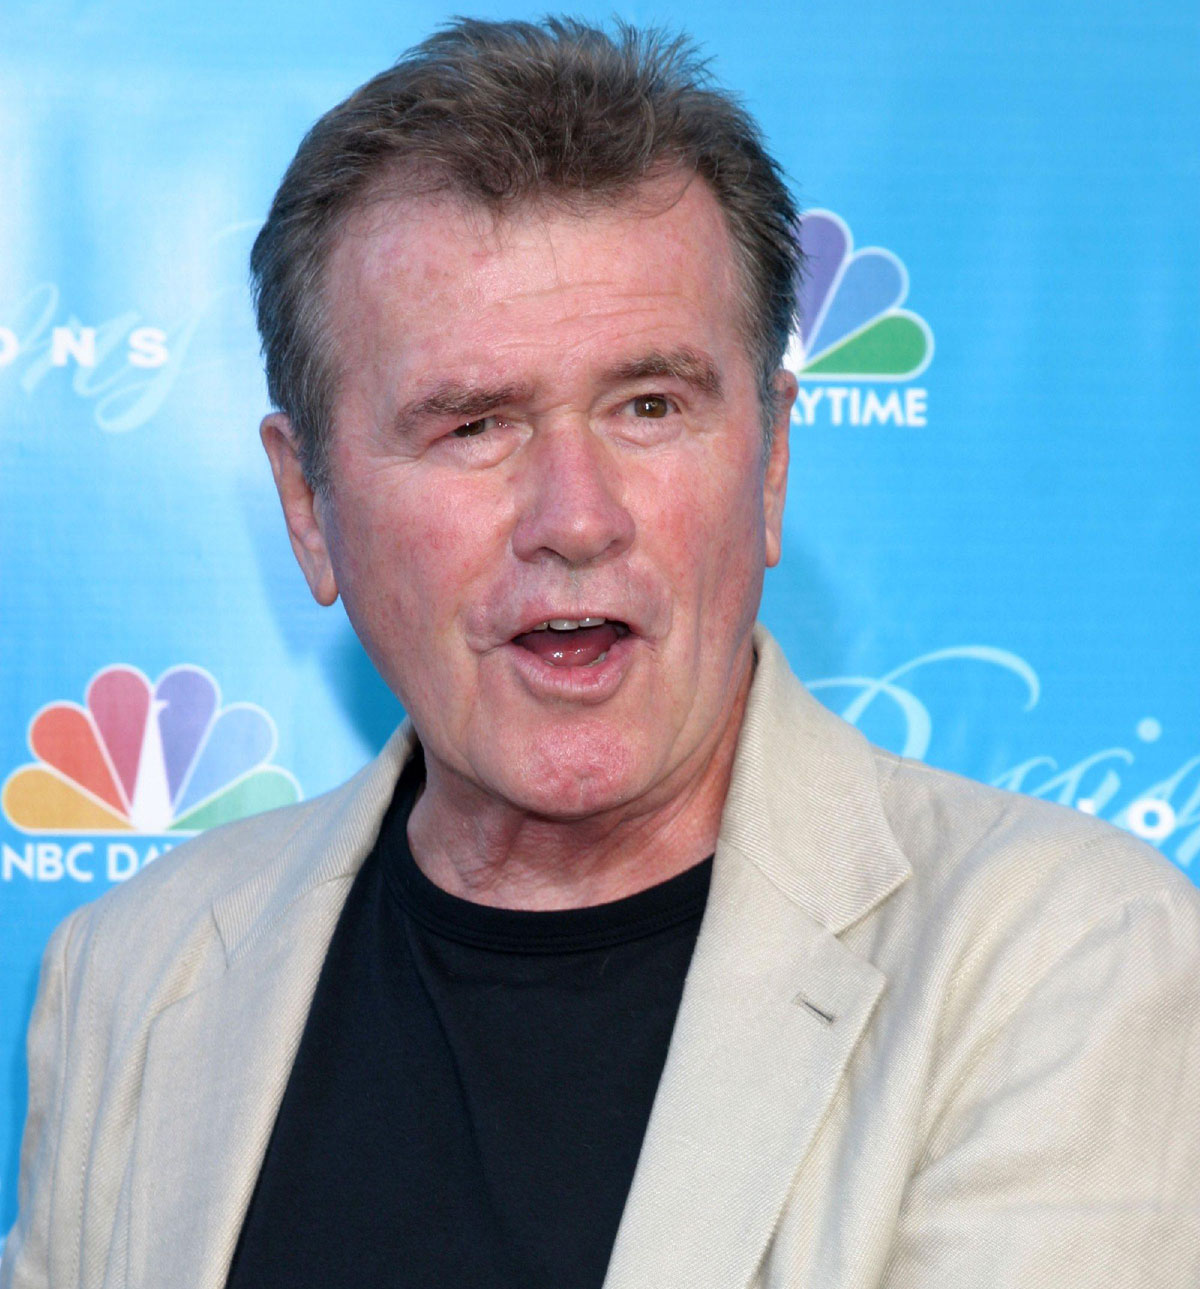 John Reilly has passed away at age 84.